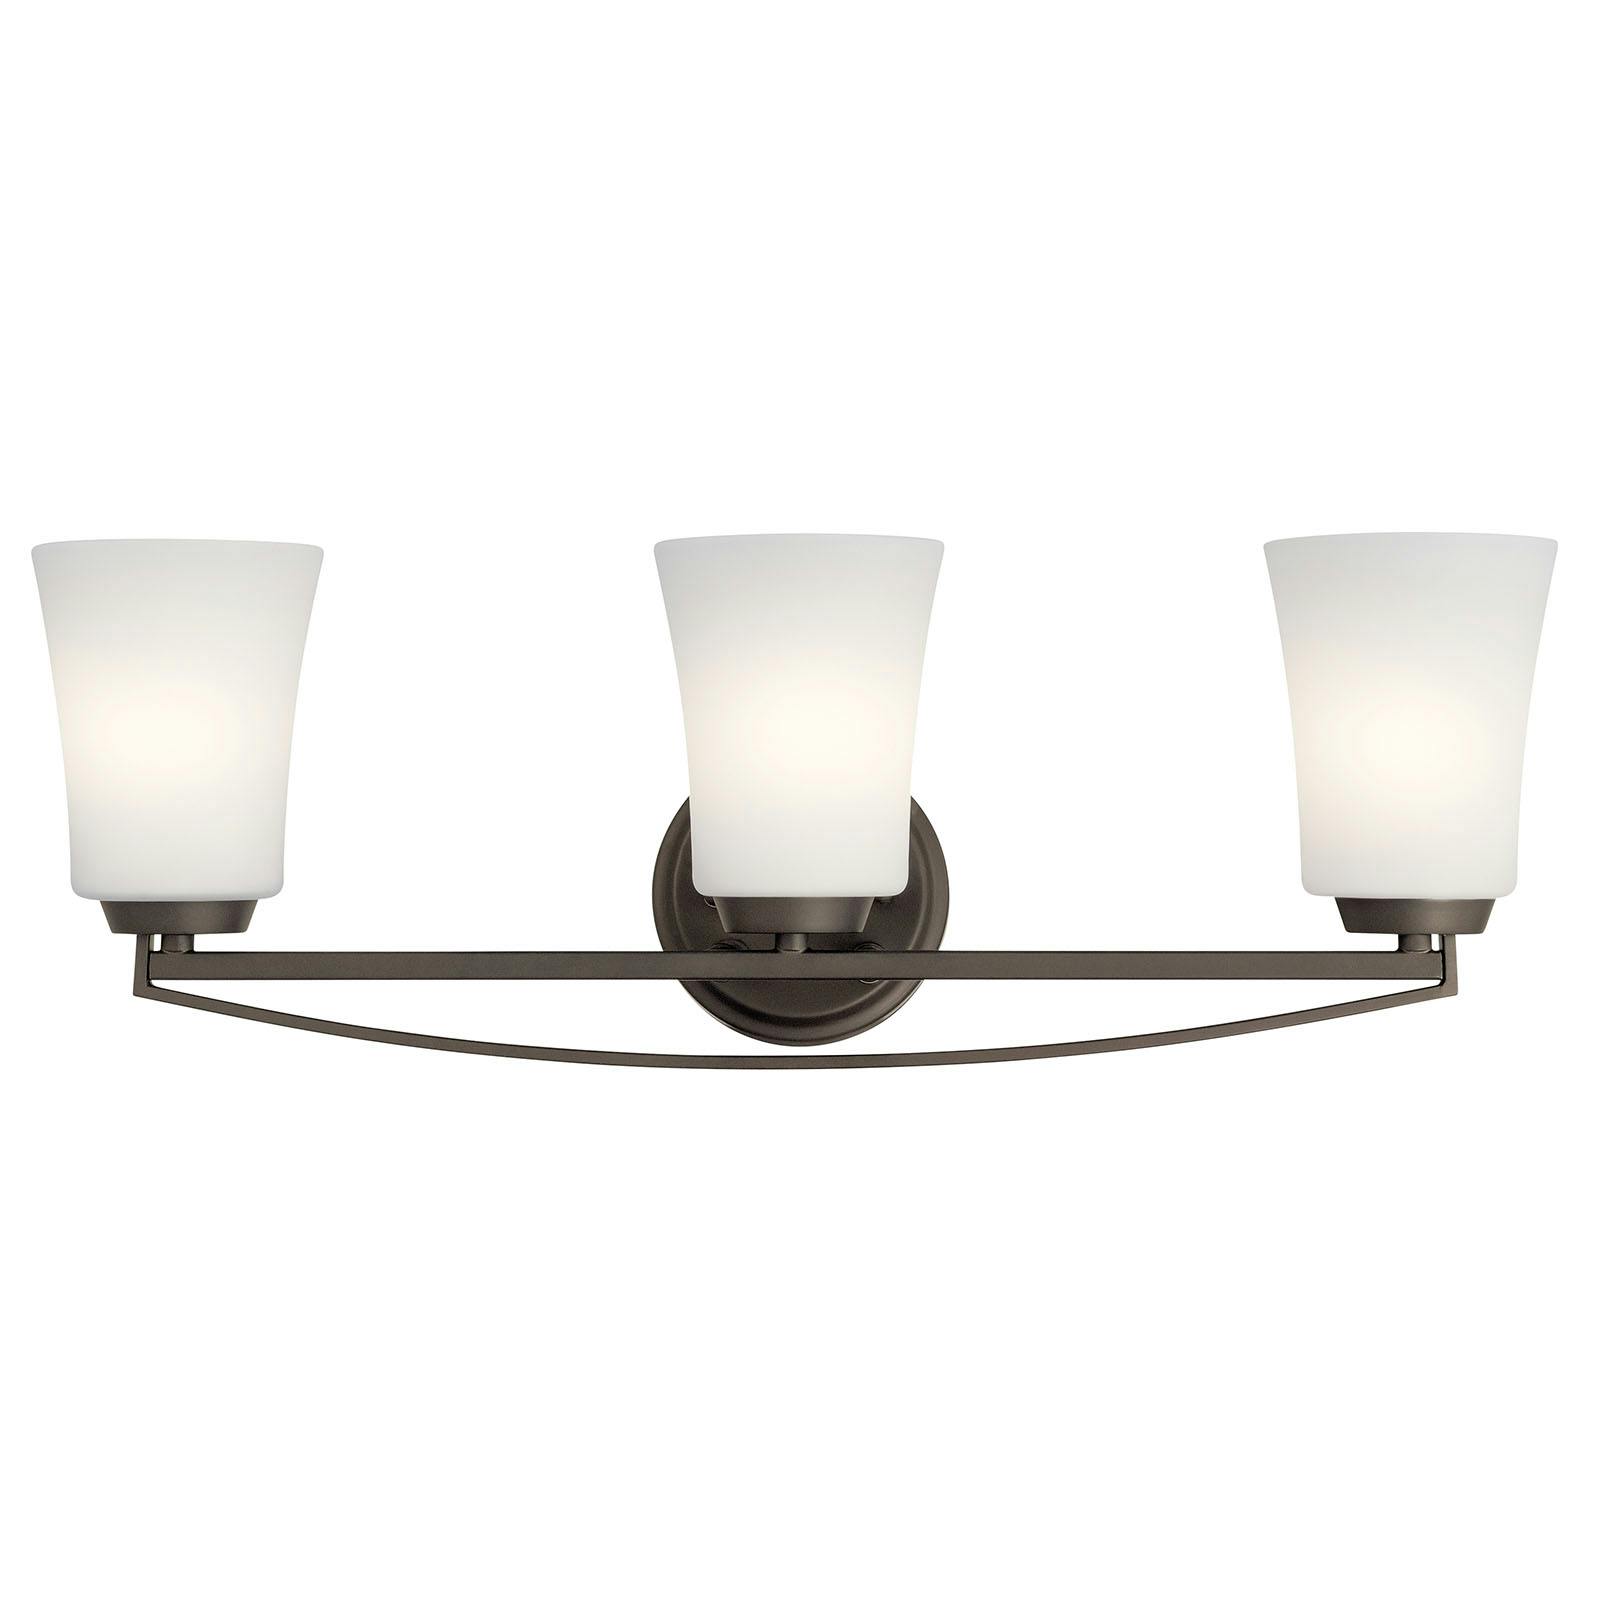 The Tao 3 Light Vanity Light Olde Bronze® facing up on a white background